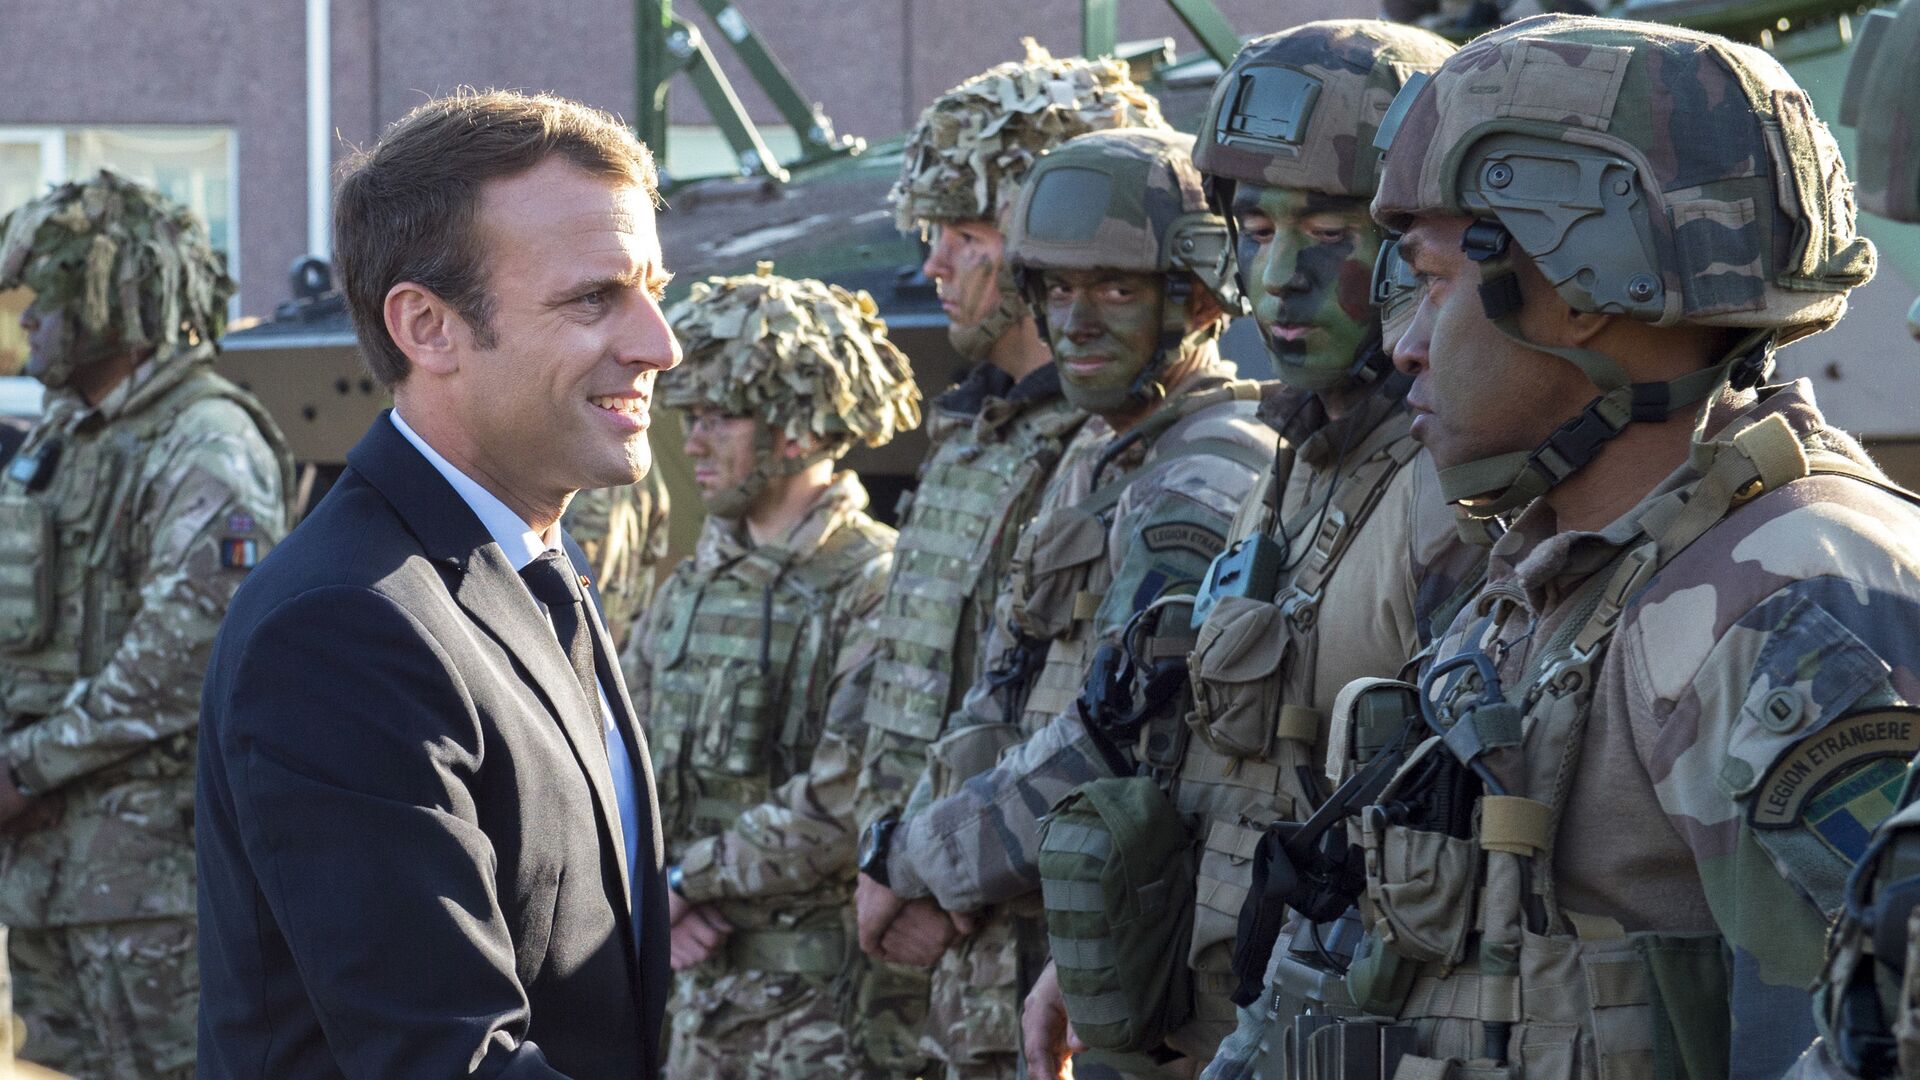 FILE - In this Friday, Sept. 29, 2017 file photo, France's President Emmanuel Macron, left, shakes hands with French soldiers of the NATO Battle Group at the Tapa military base, about 90 kilometers (56 miles) west of Tallinn, Estonia - Sputnik International, 1920, 23.01.2022